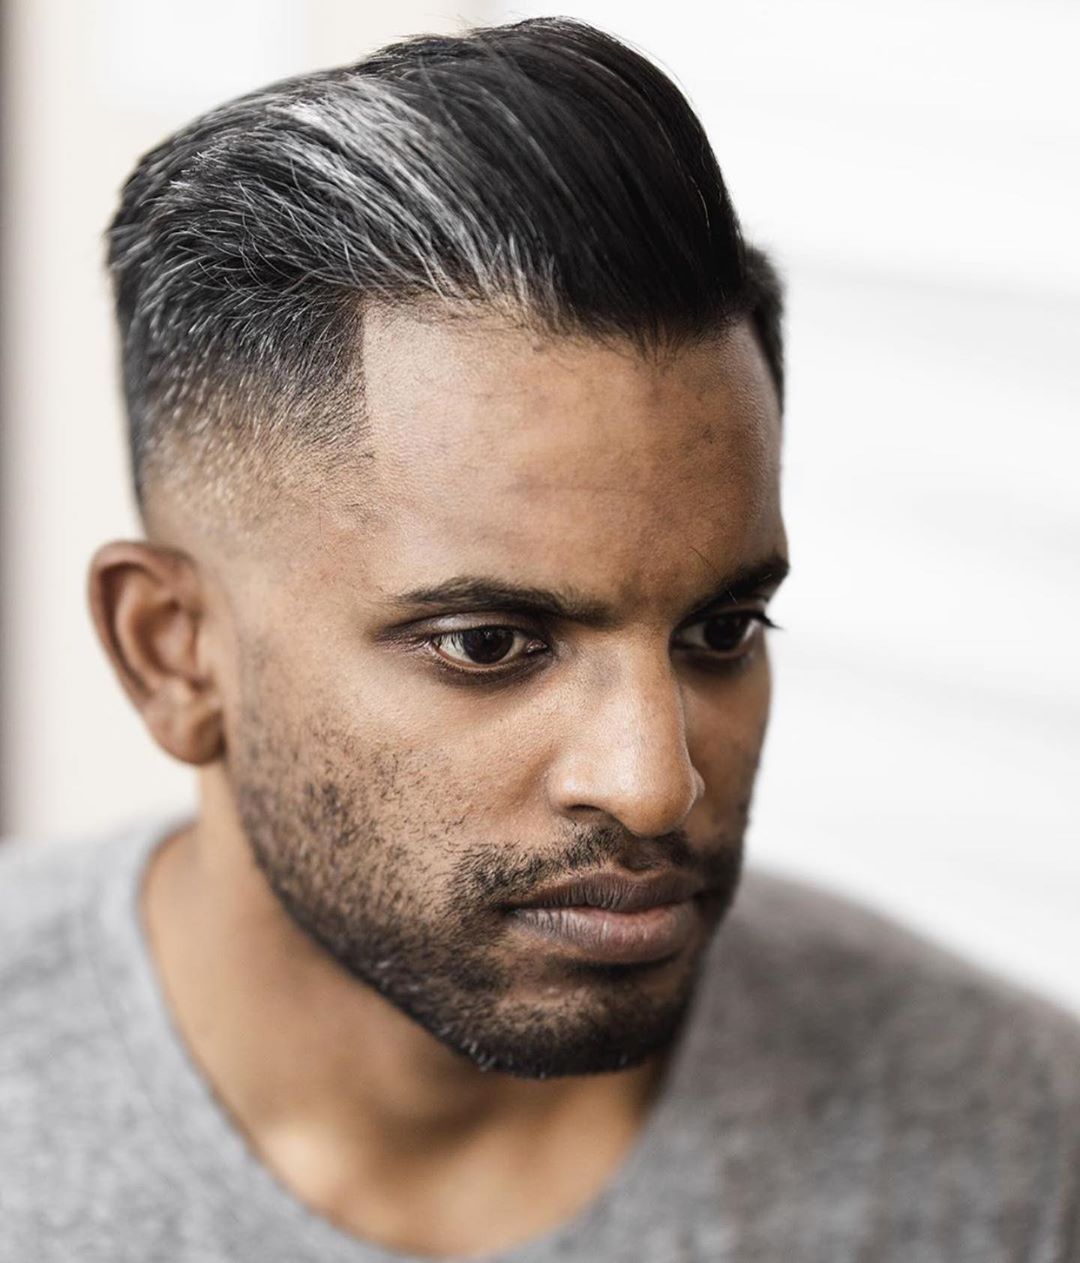 Mens Grey Hairstyles The Hottest Looks of The Season  All Things Hair US